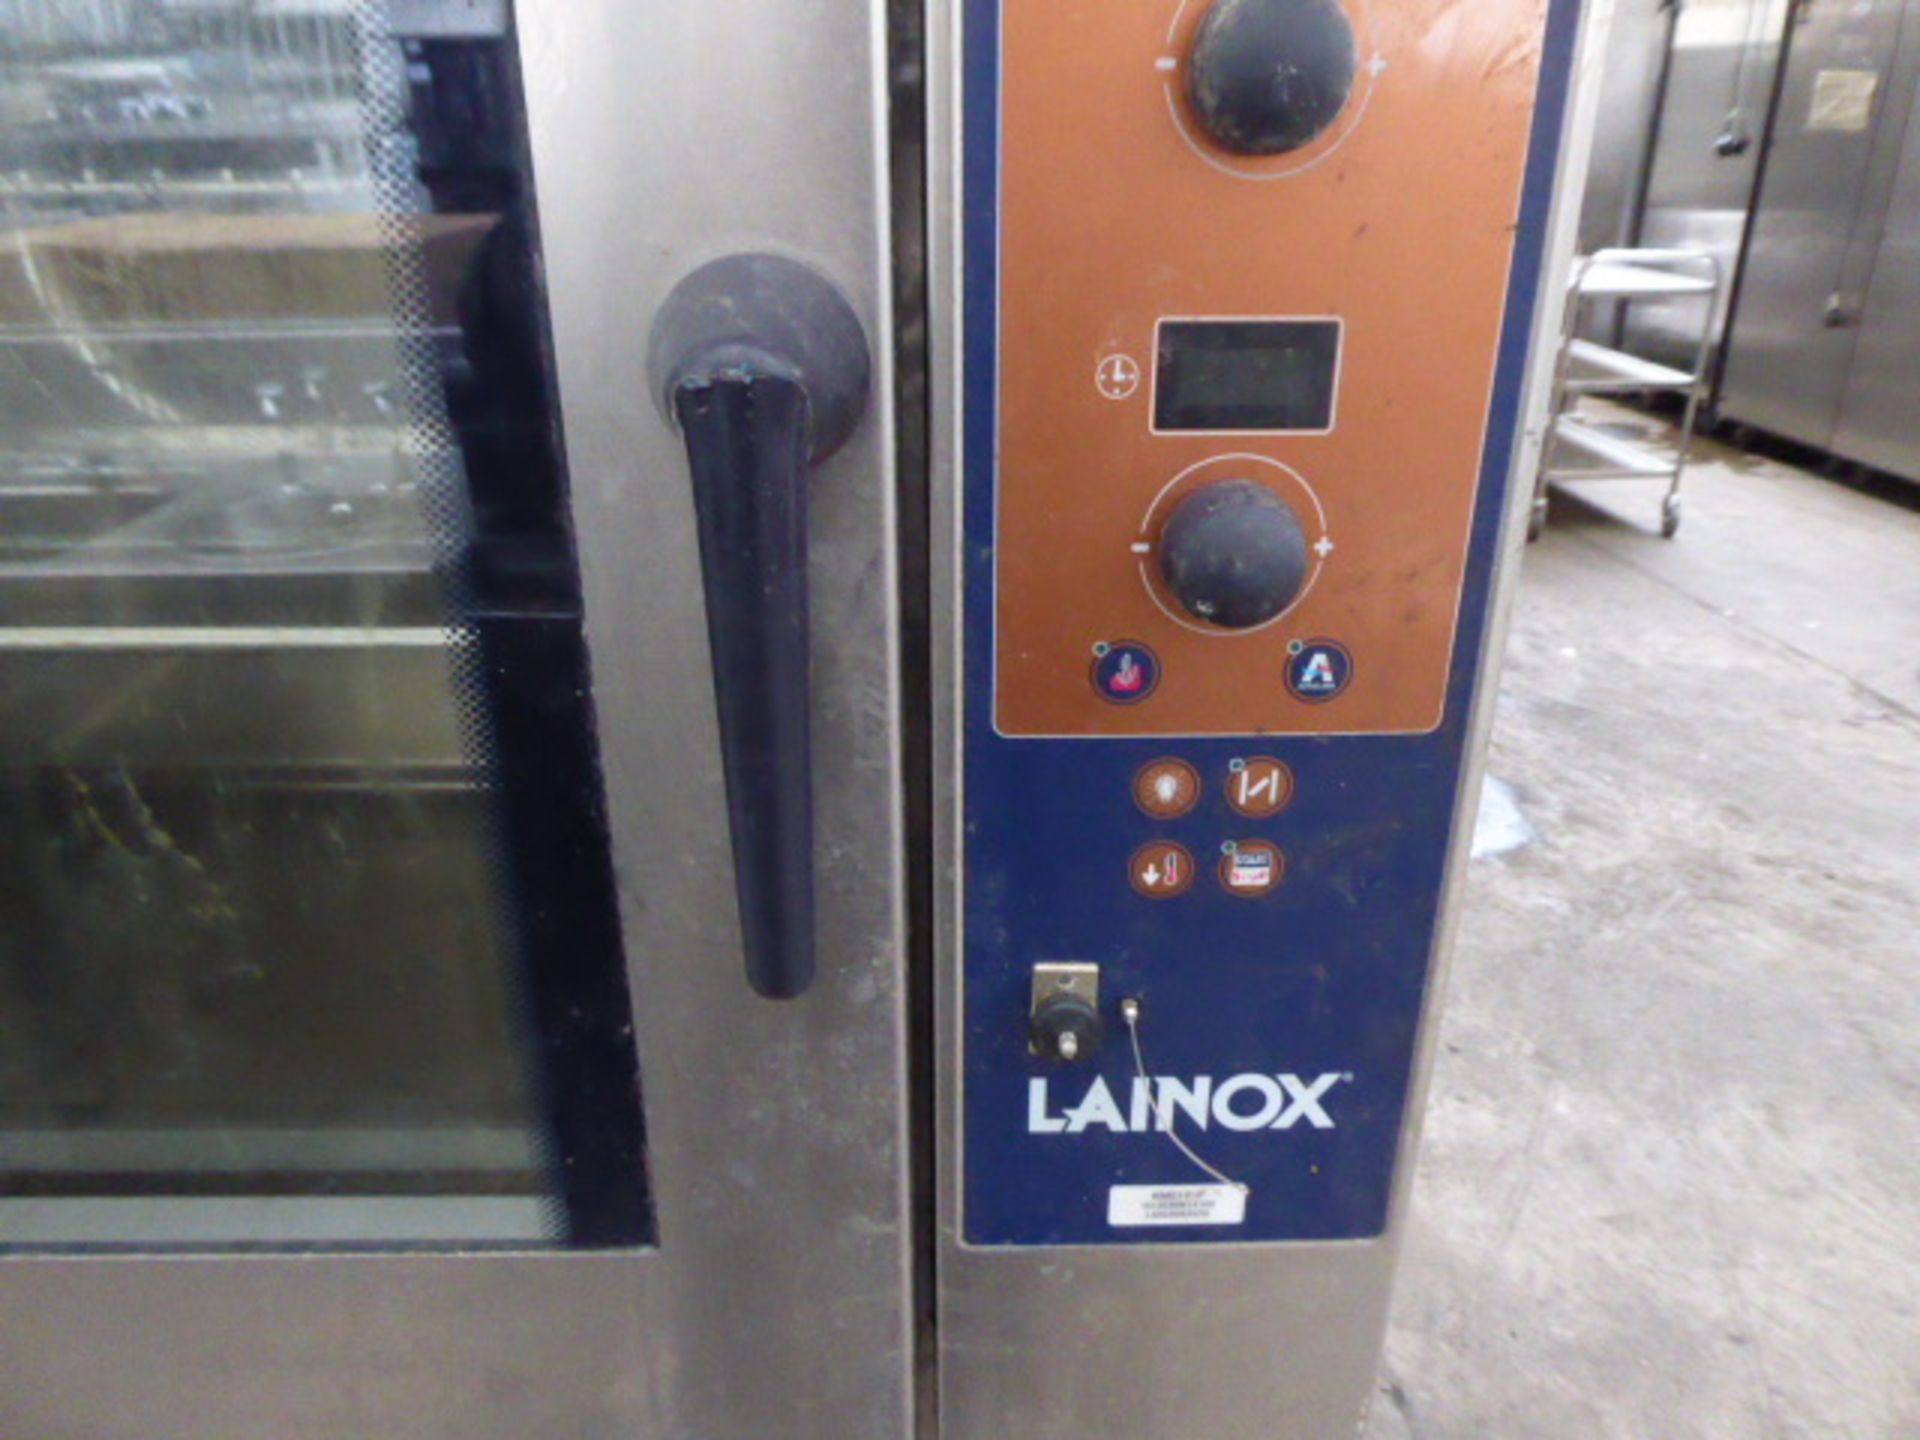 100cm Lainox type HMG101P 10 shelf combination oven on stand - Image 4 of 4